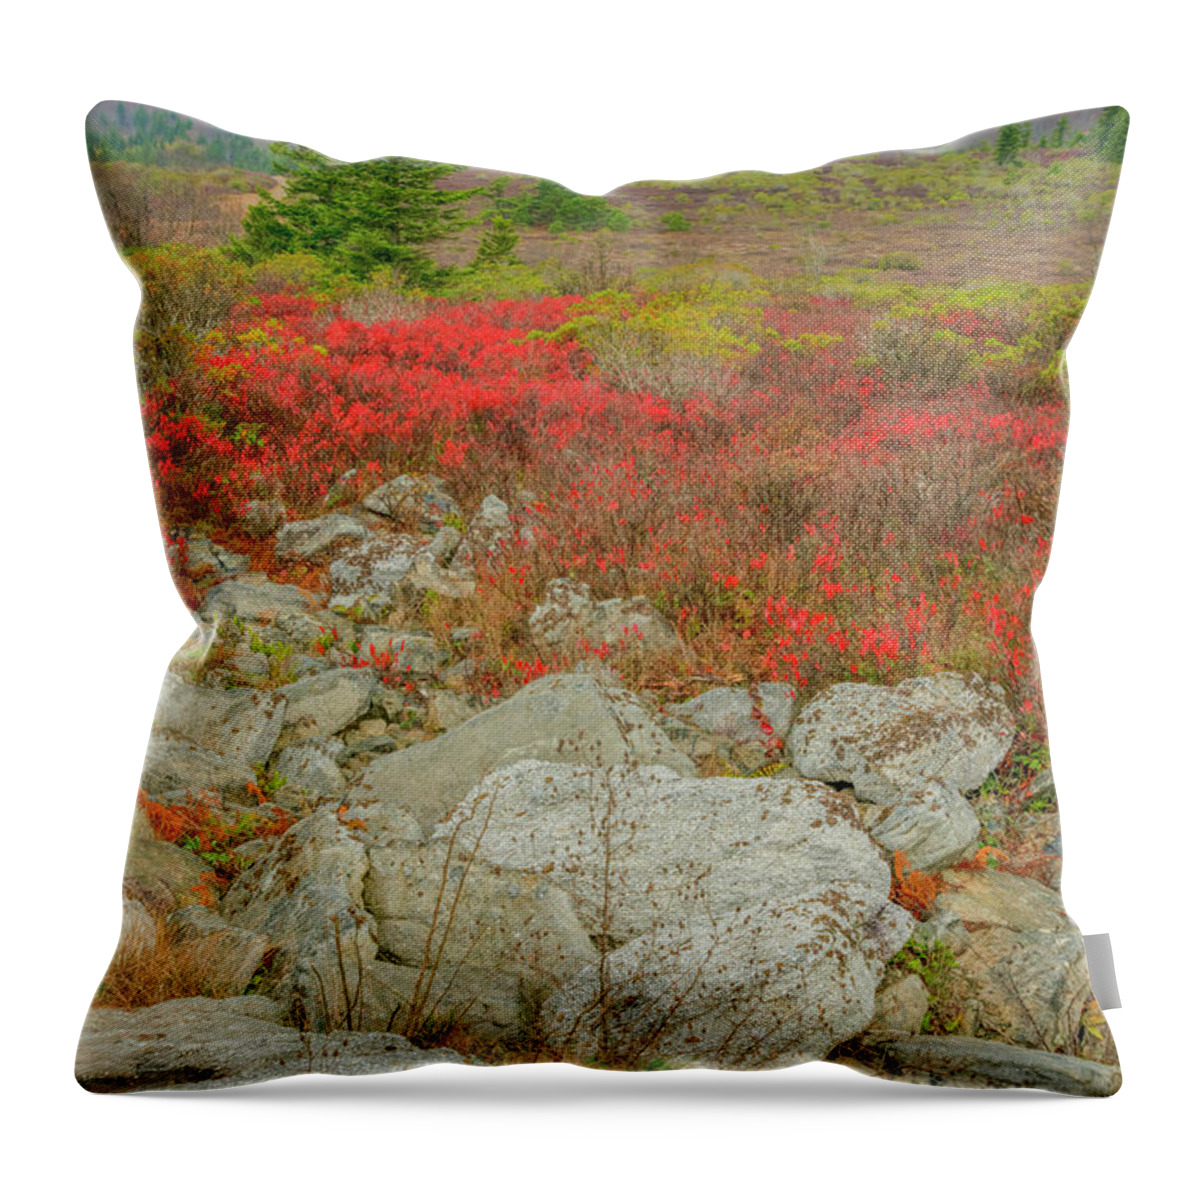 Fall Color Throw Pillow featuring the photograph Wild Blueberries by David Waldrop